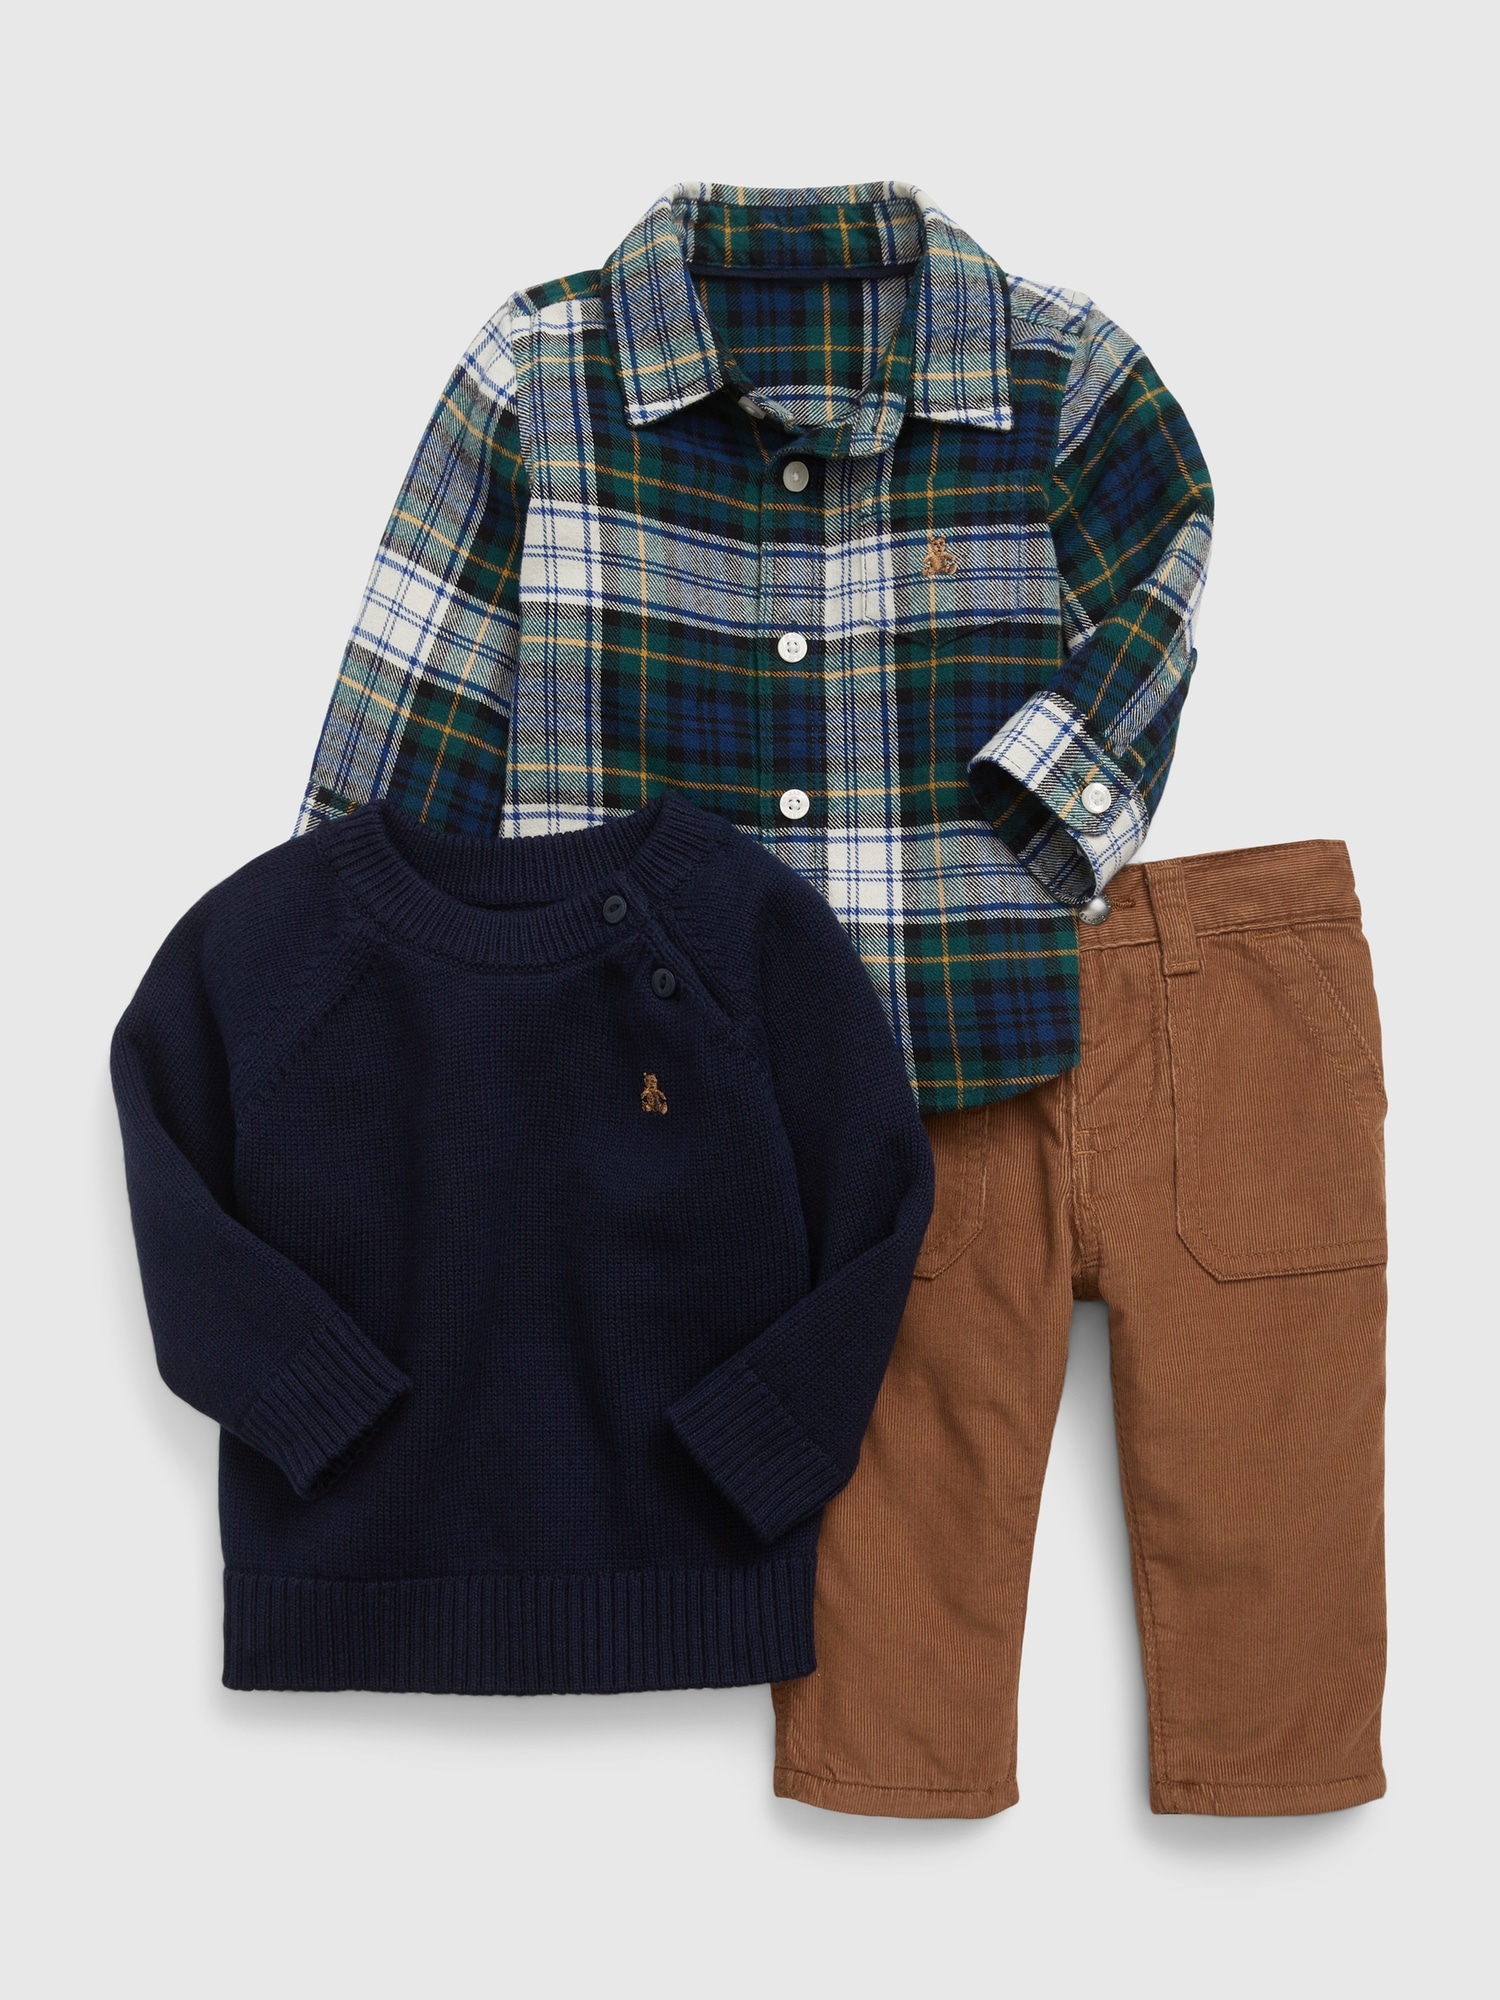 Gap Baby Three-Piece Outfit Set